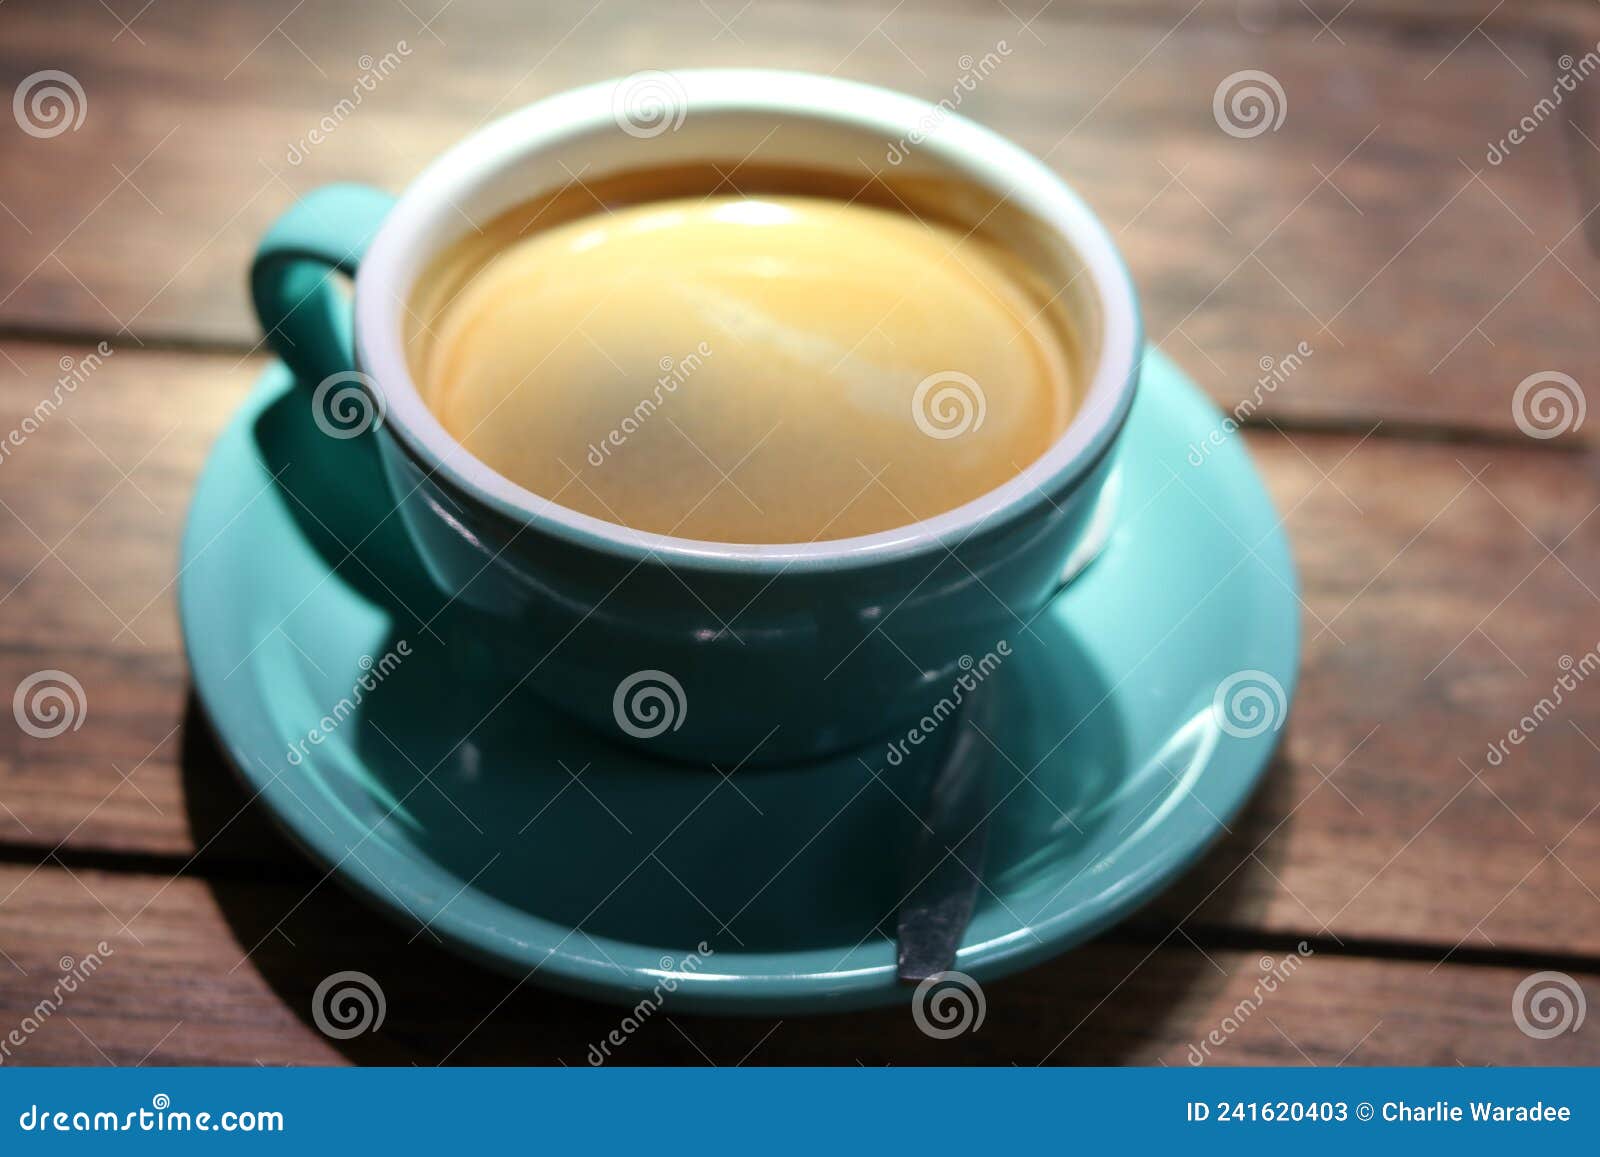 hot black coffee in blue ceramic cup on wooden table background.